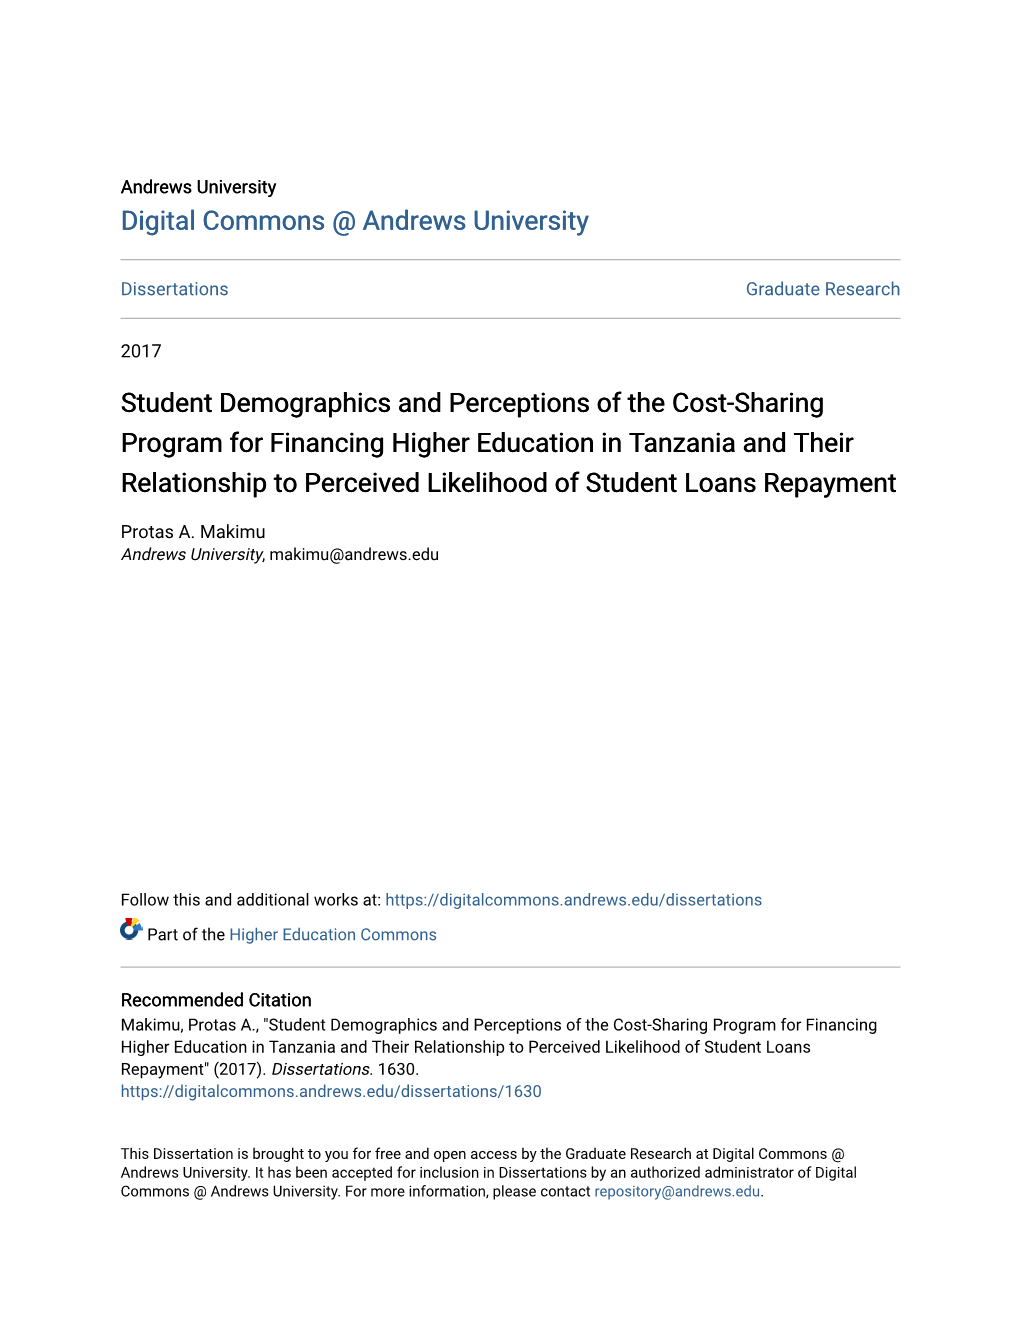 Student Demographics and Perceptions of the Cost-Sharing